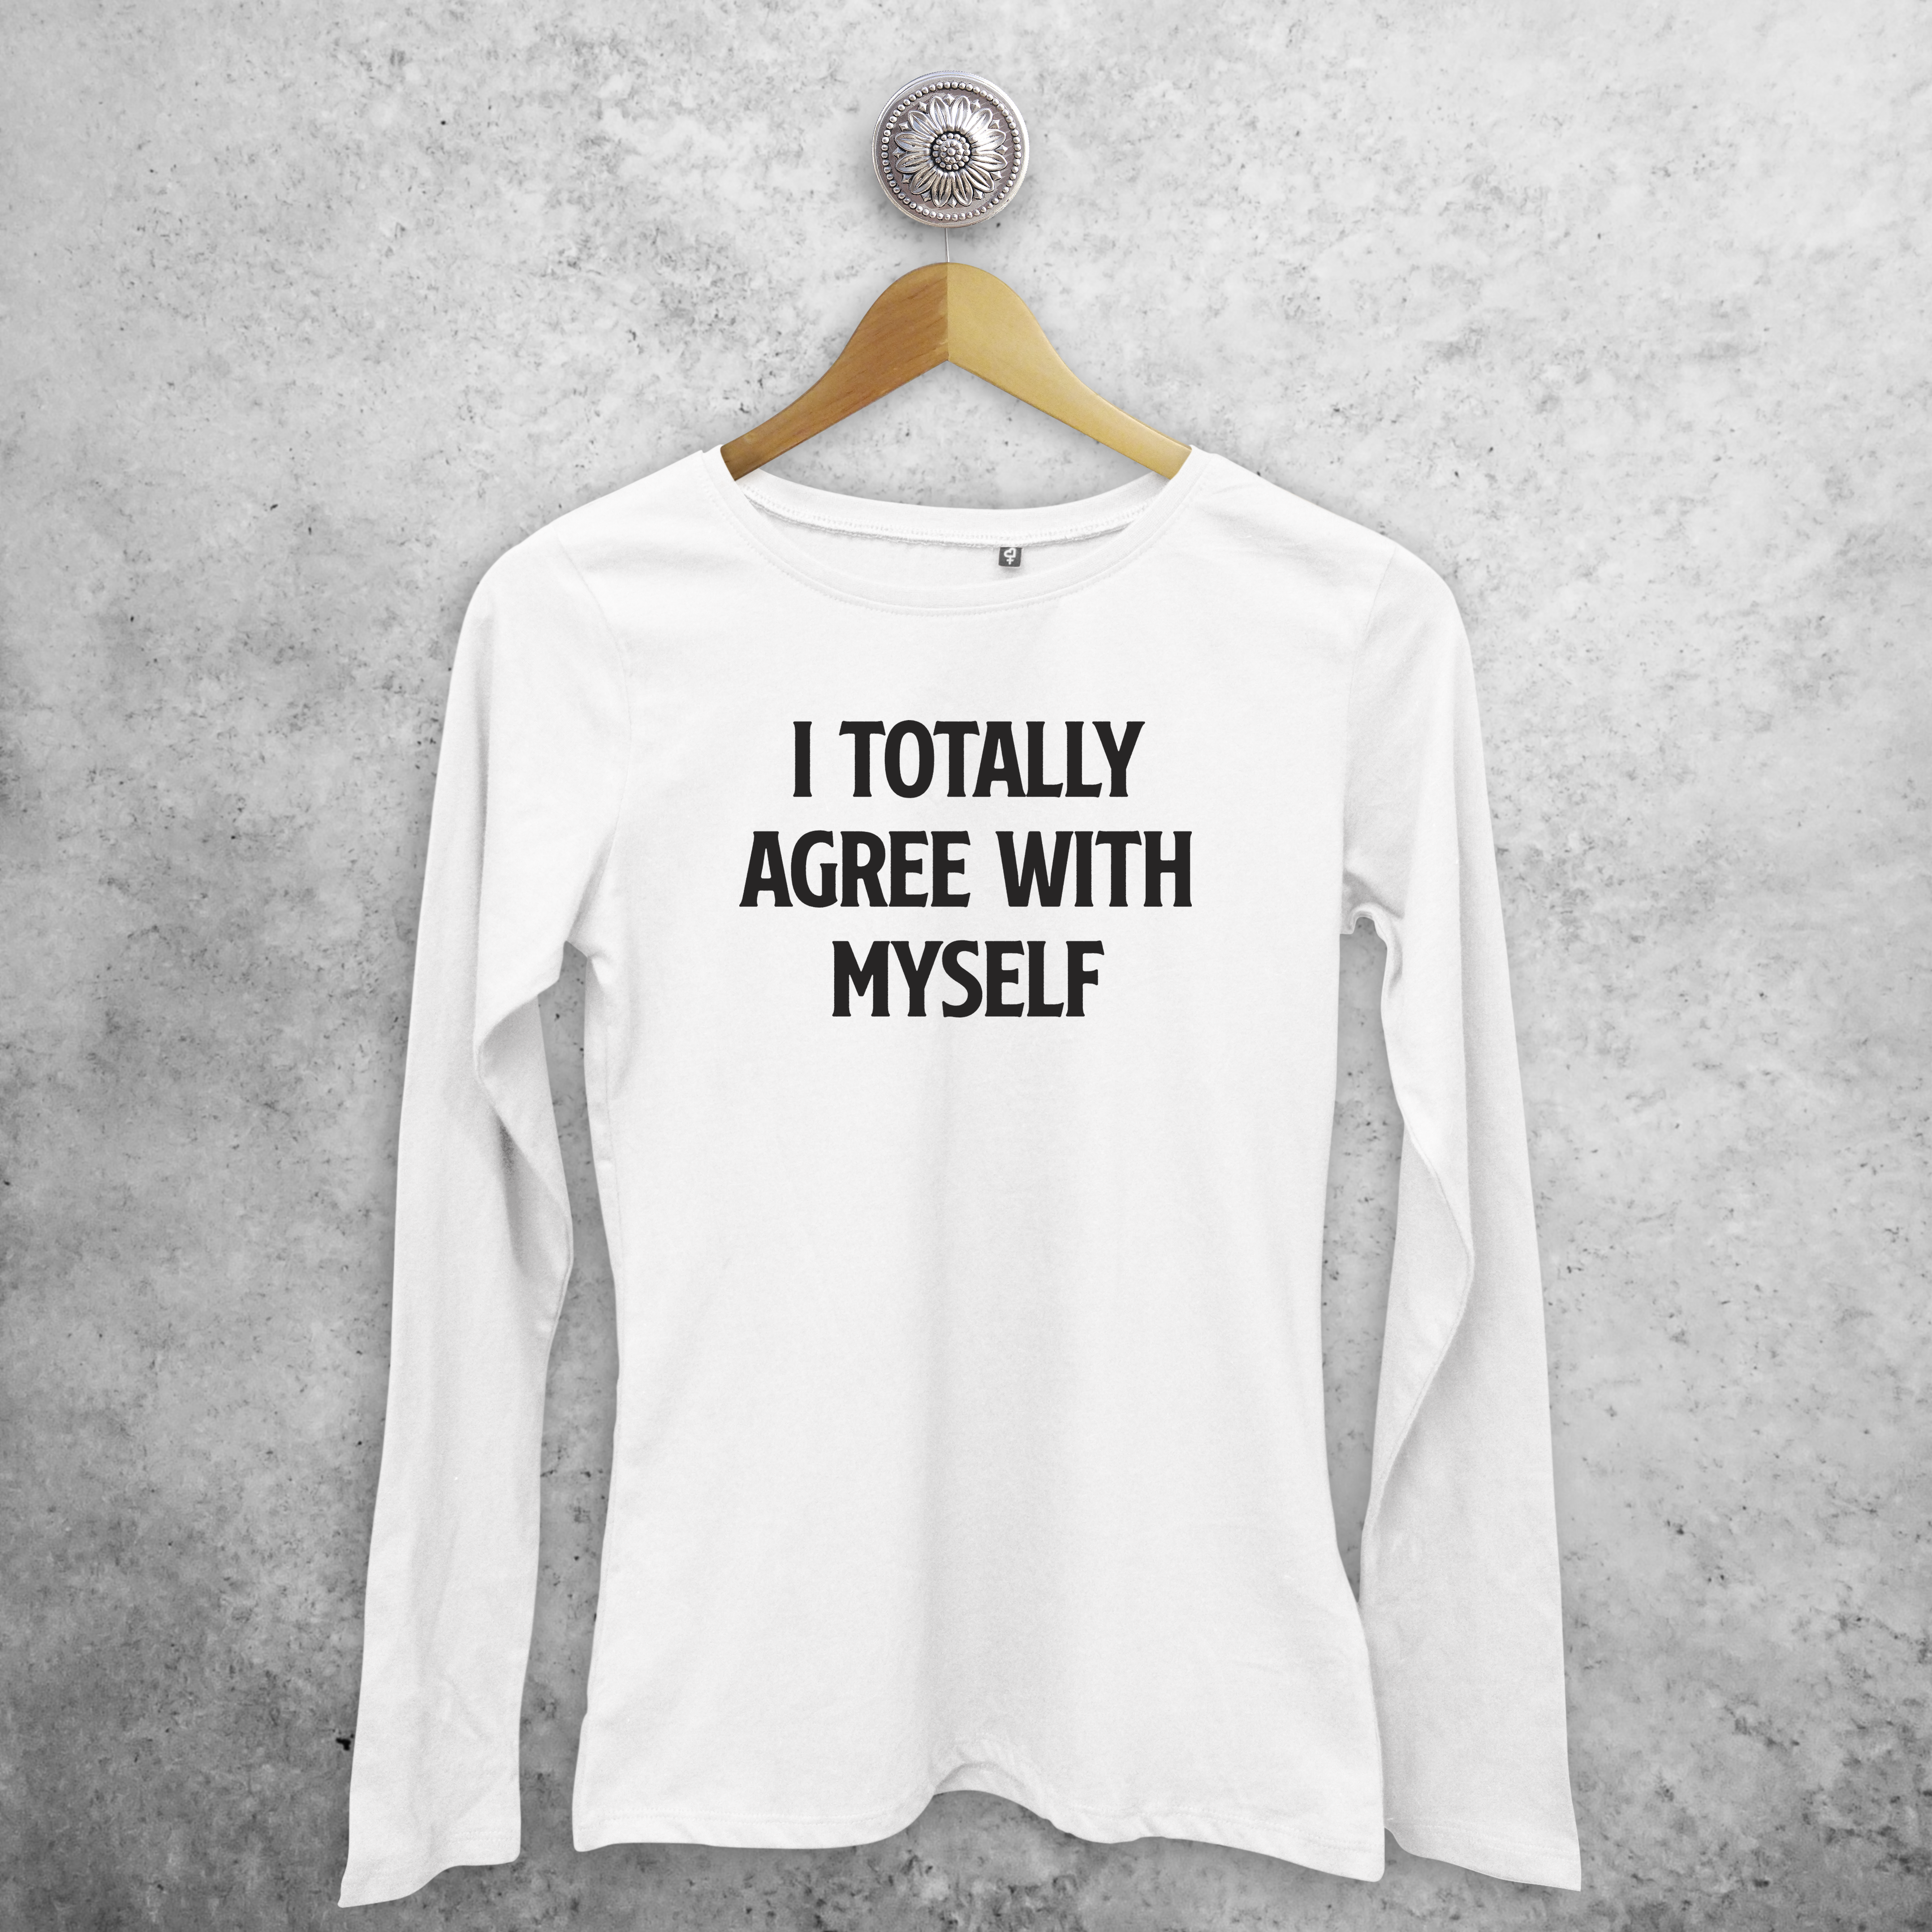 'I totally agree with myself' adult longsleeve shirt